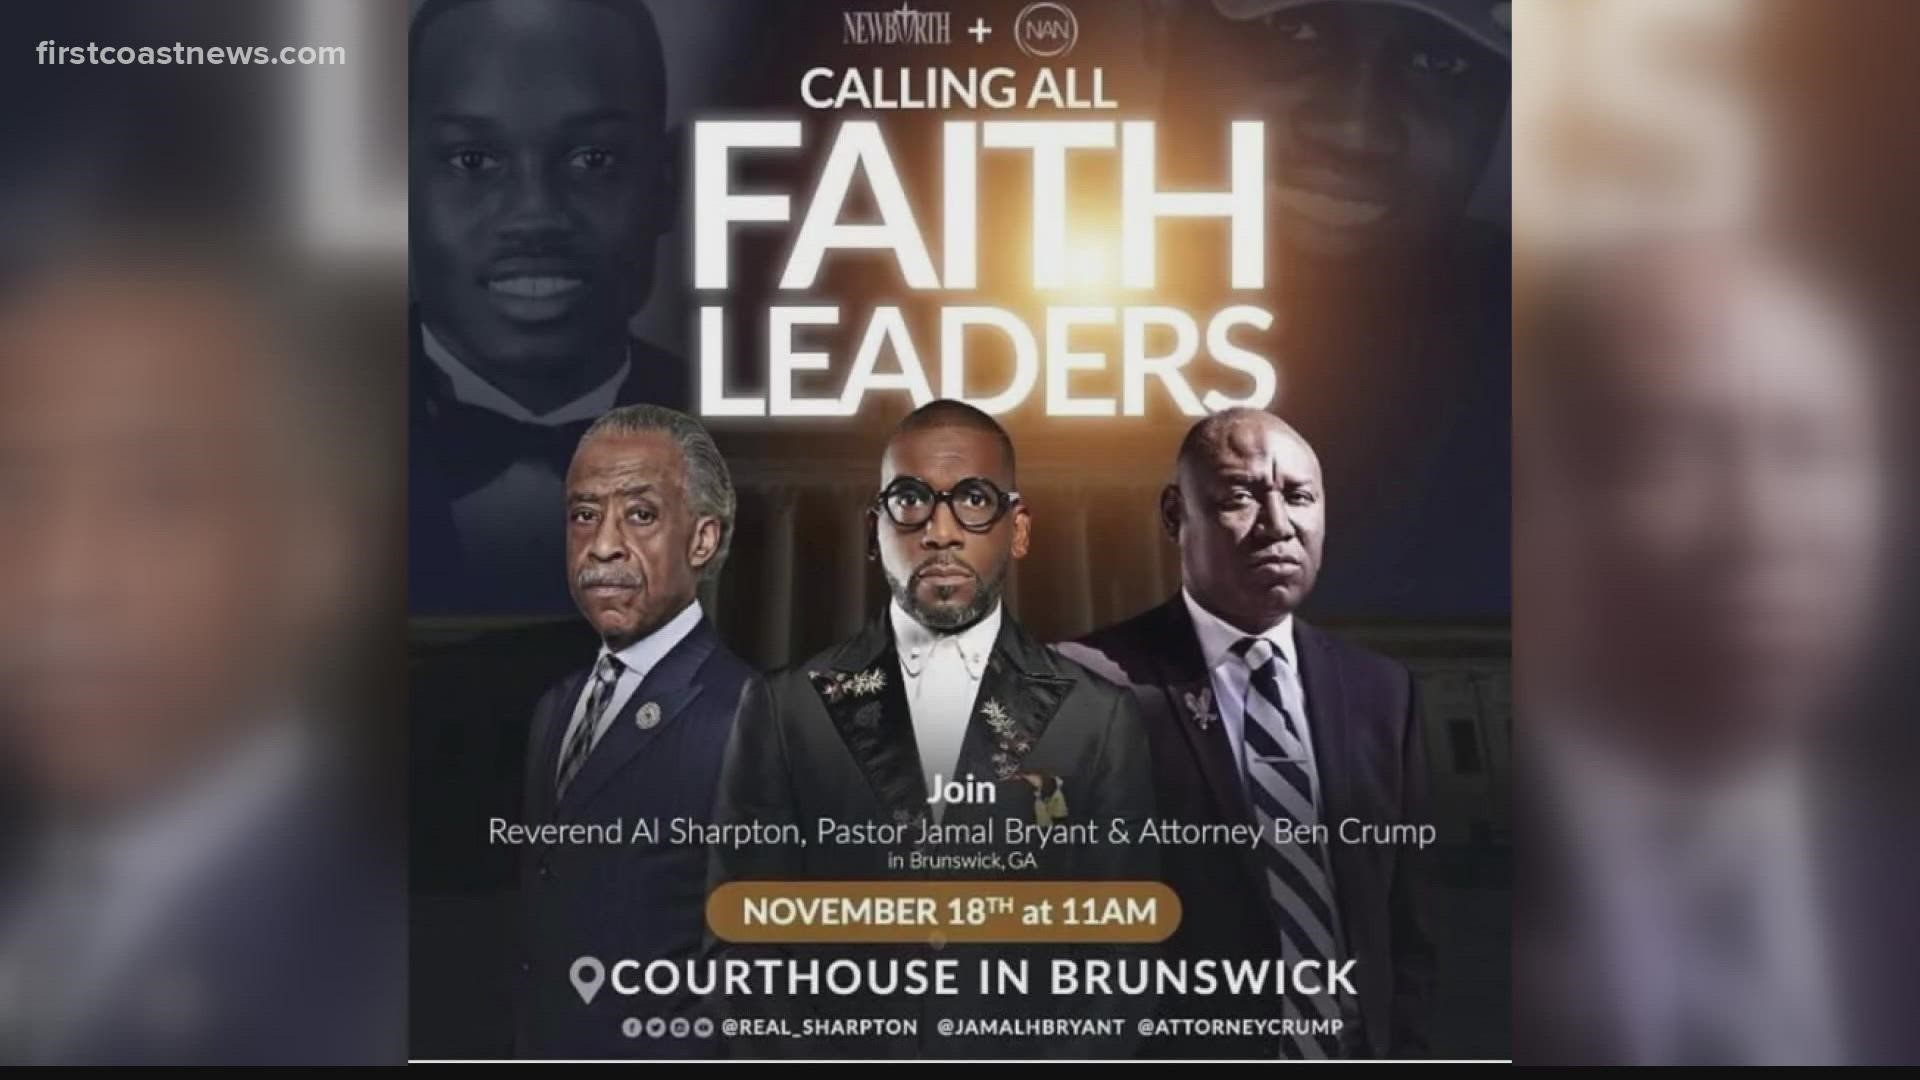 Many of the pastors are going to Brunswick in response to Kevin Gough's comments concerning black pastors at the death of Ahmaud Arbery trial.